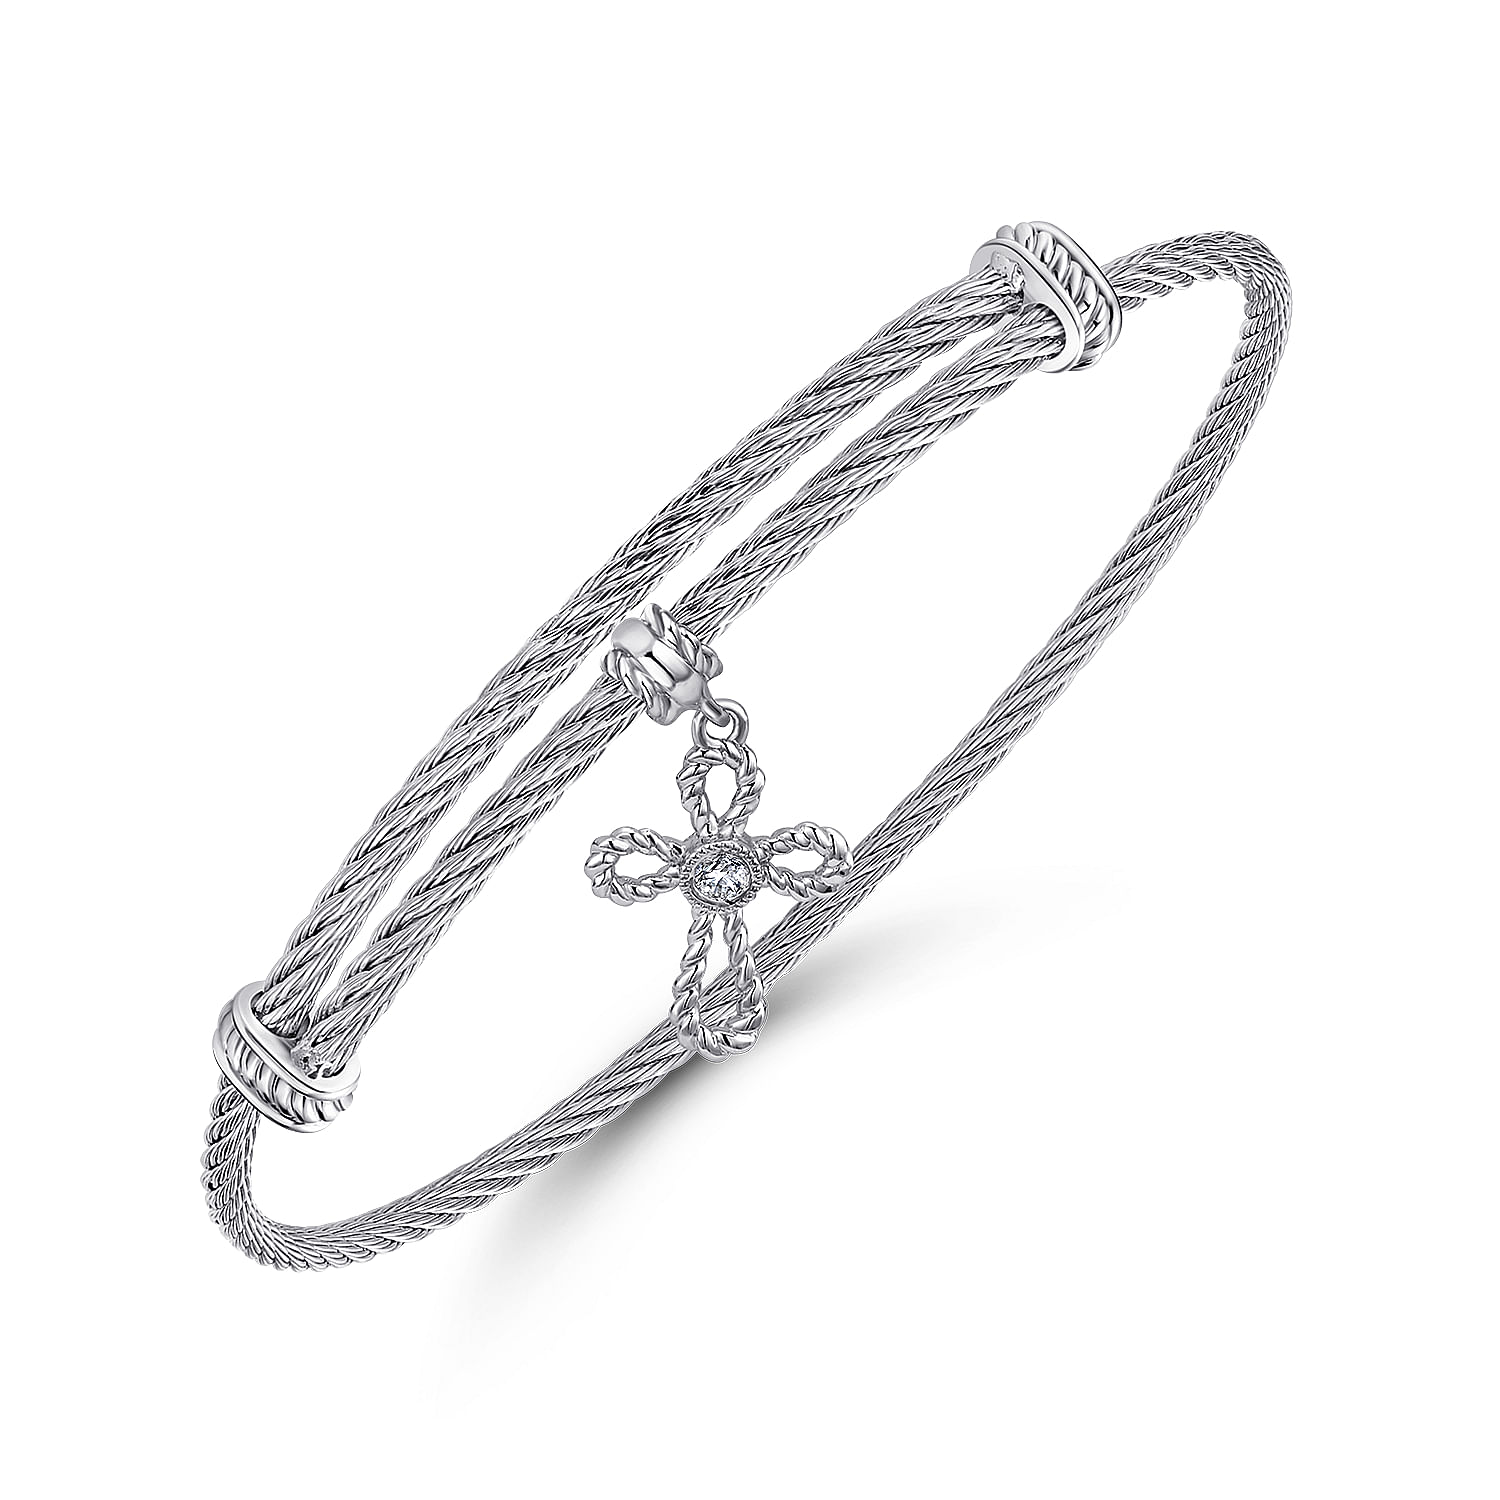 Adjustable Twisted Cable Stainless Steel Bangle with Sterling Silver and White Sapphire Cross Charm